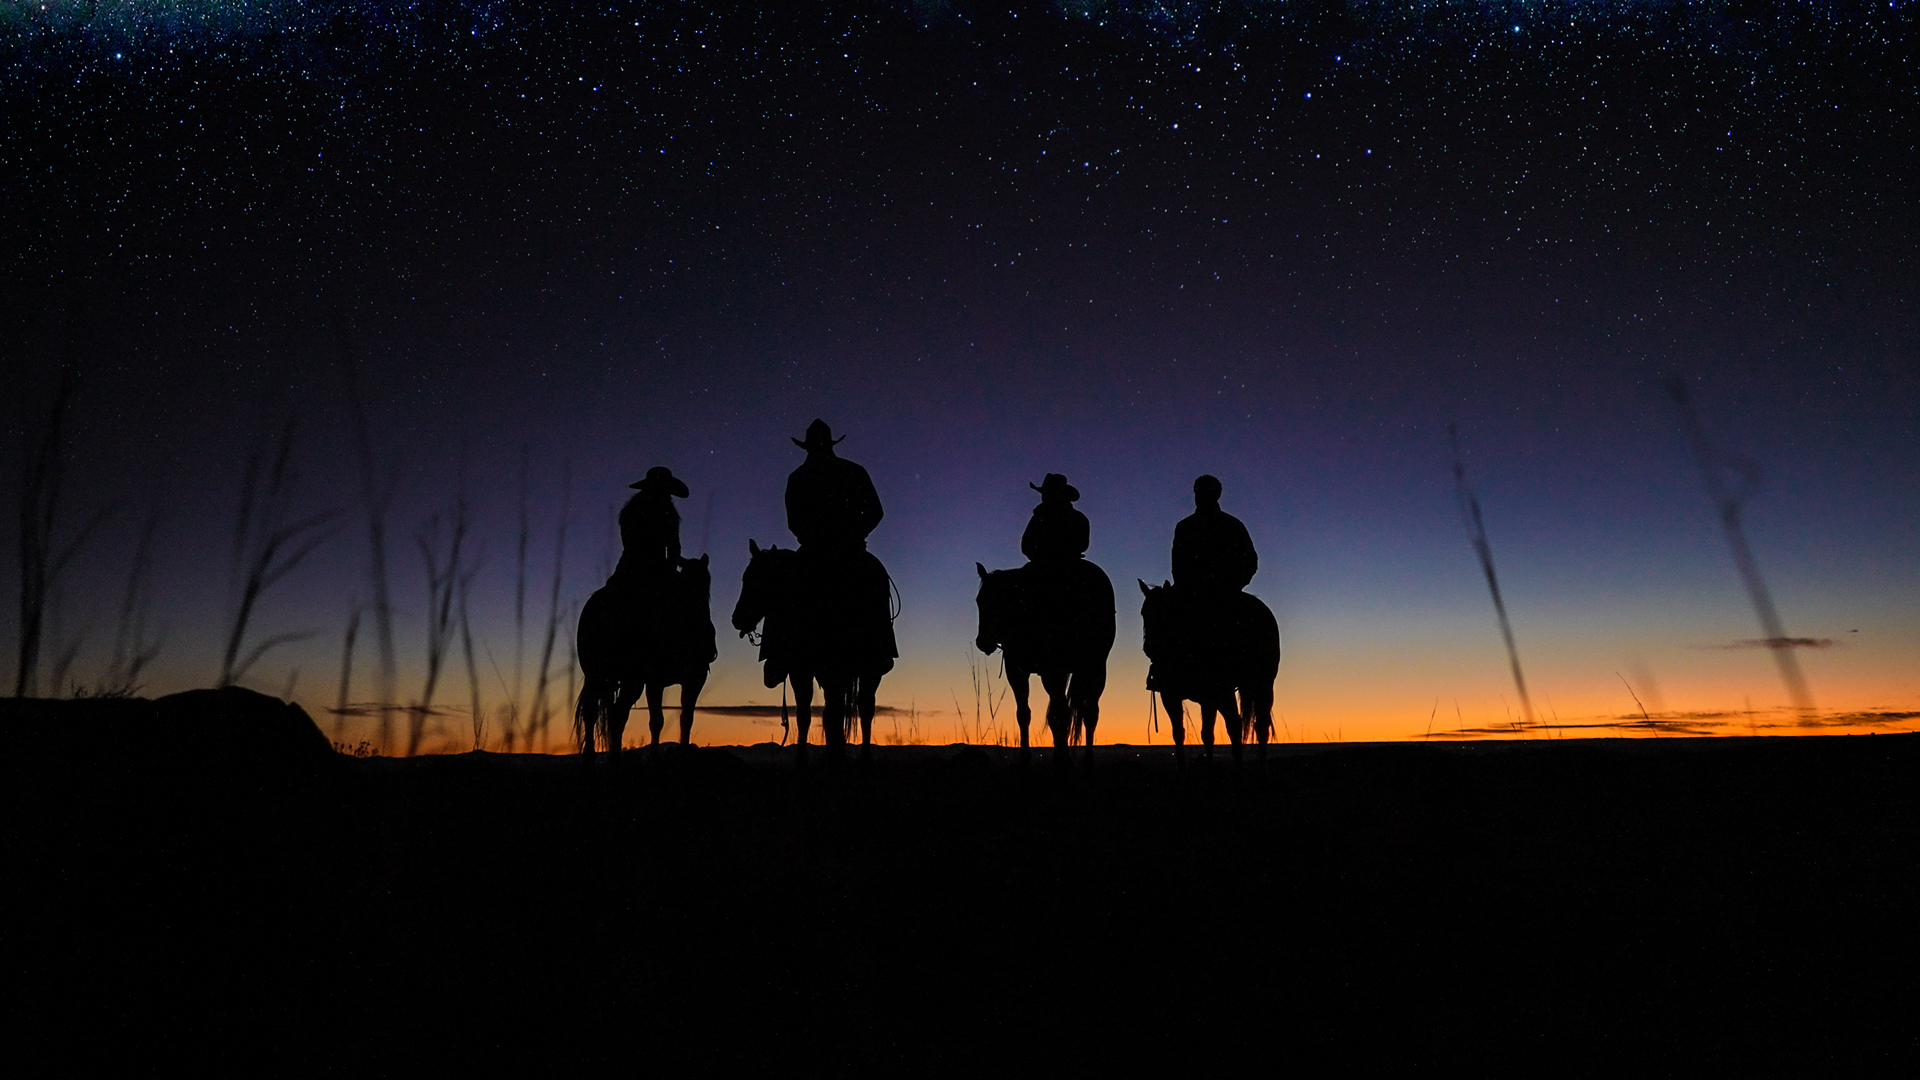 You can stream or buy the DVD of Peace River, a movie filmed largely at Philmont